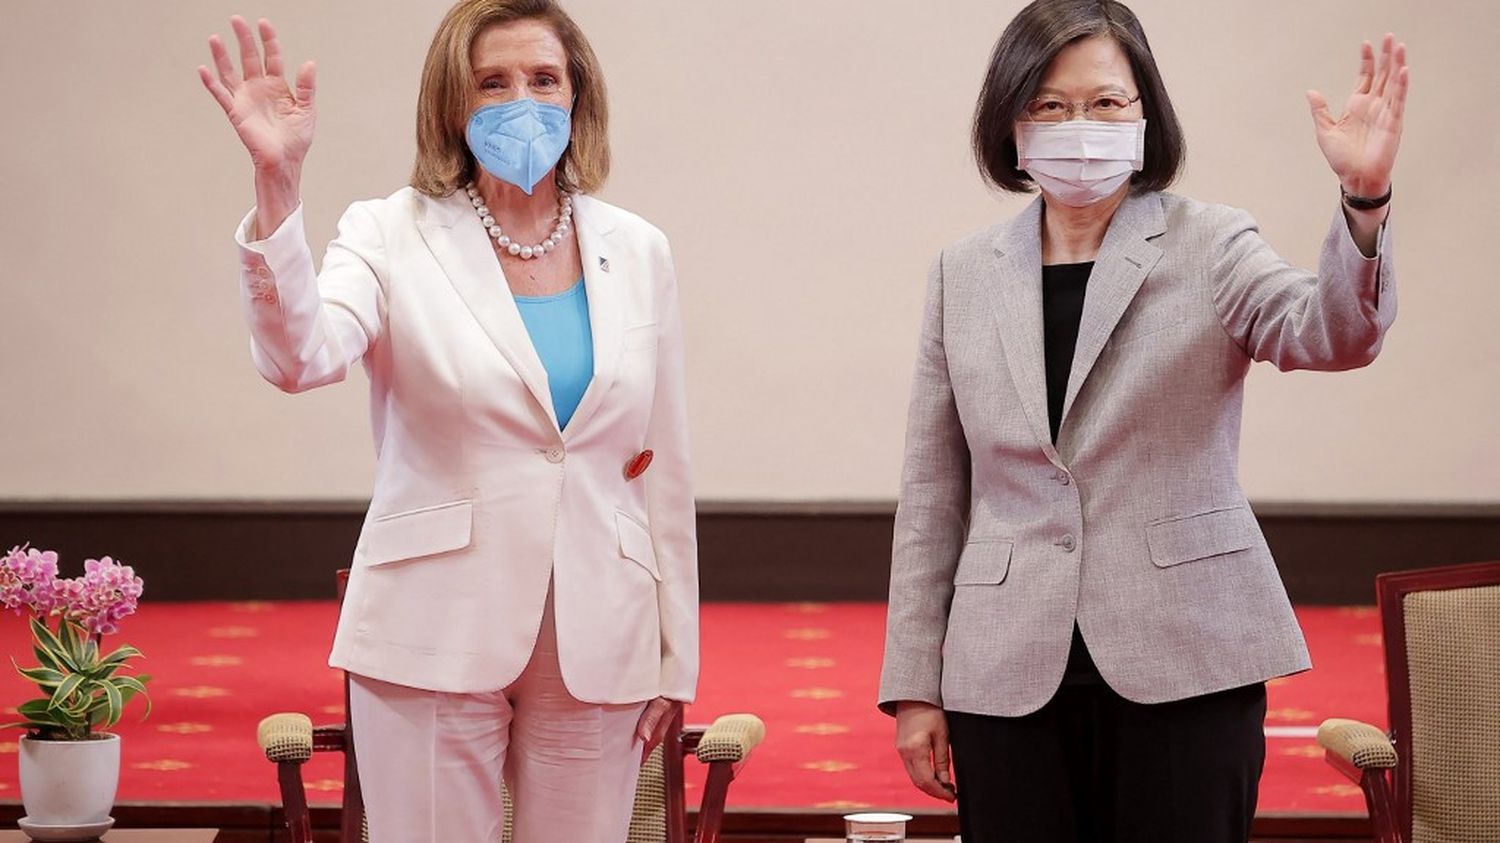 Taiwan: two weeks after Nancy Pelosi's visit denounced by China, a new delegation from the American Congress arrives in Taipei
